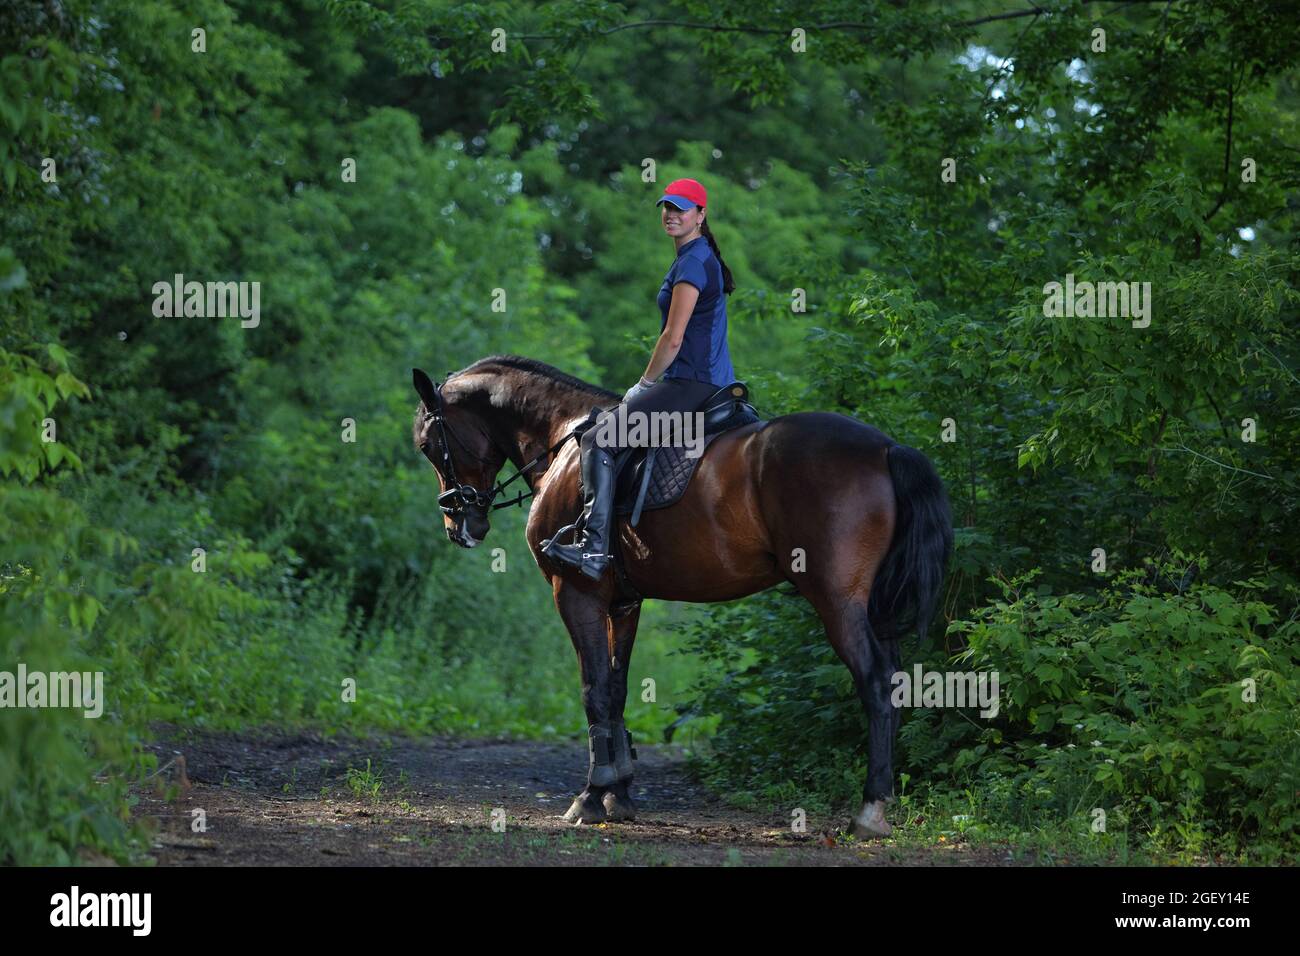 Young woman in uniform riding horse. Equestrian sport - trial Stock Photo